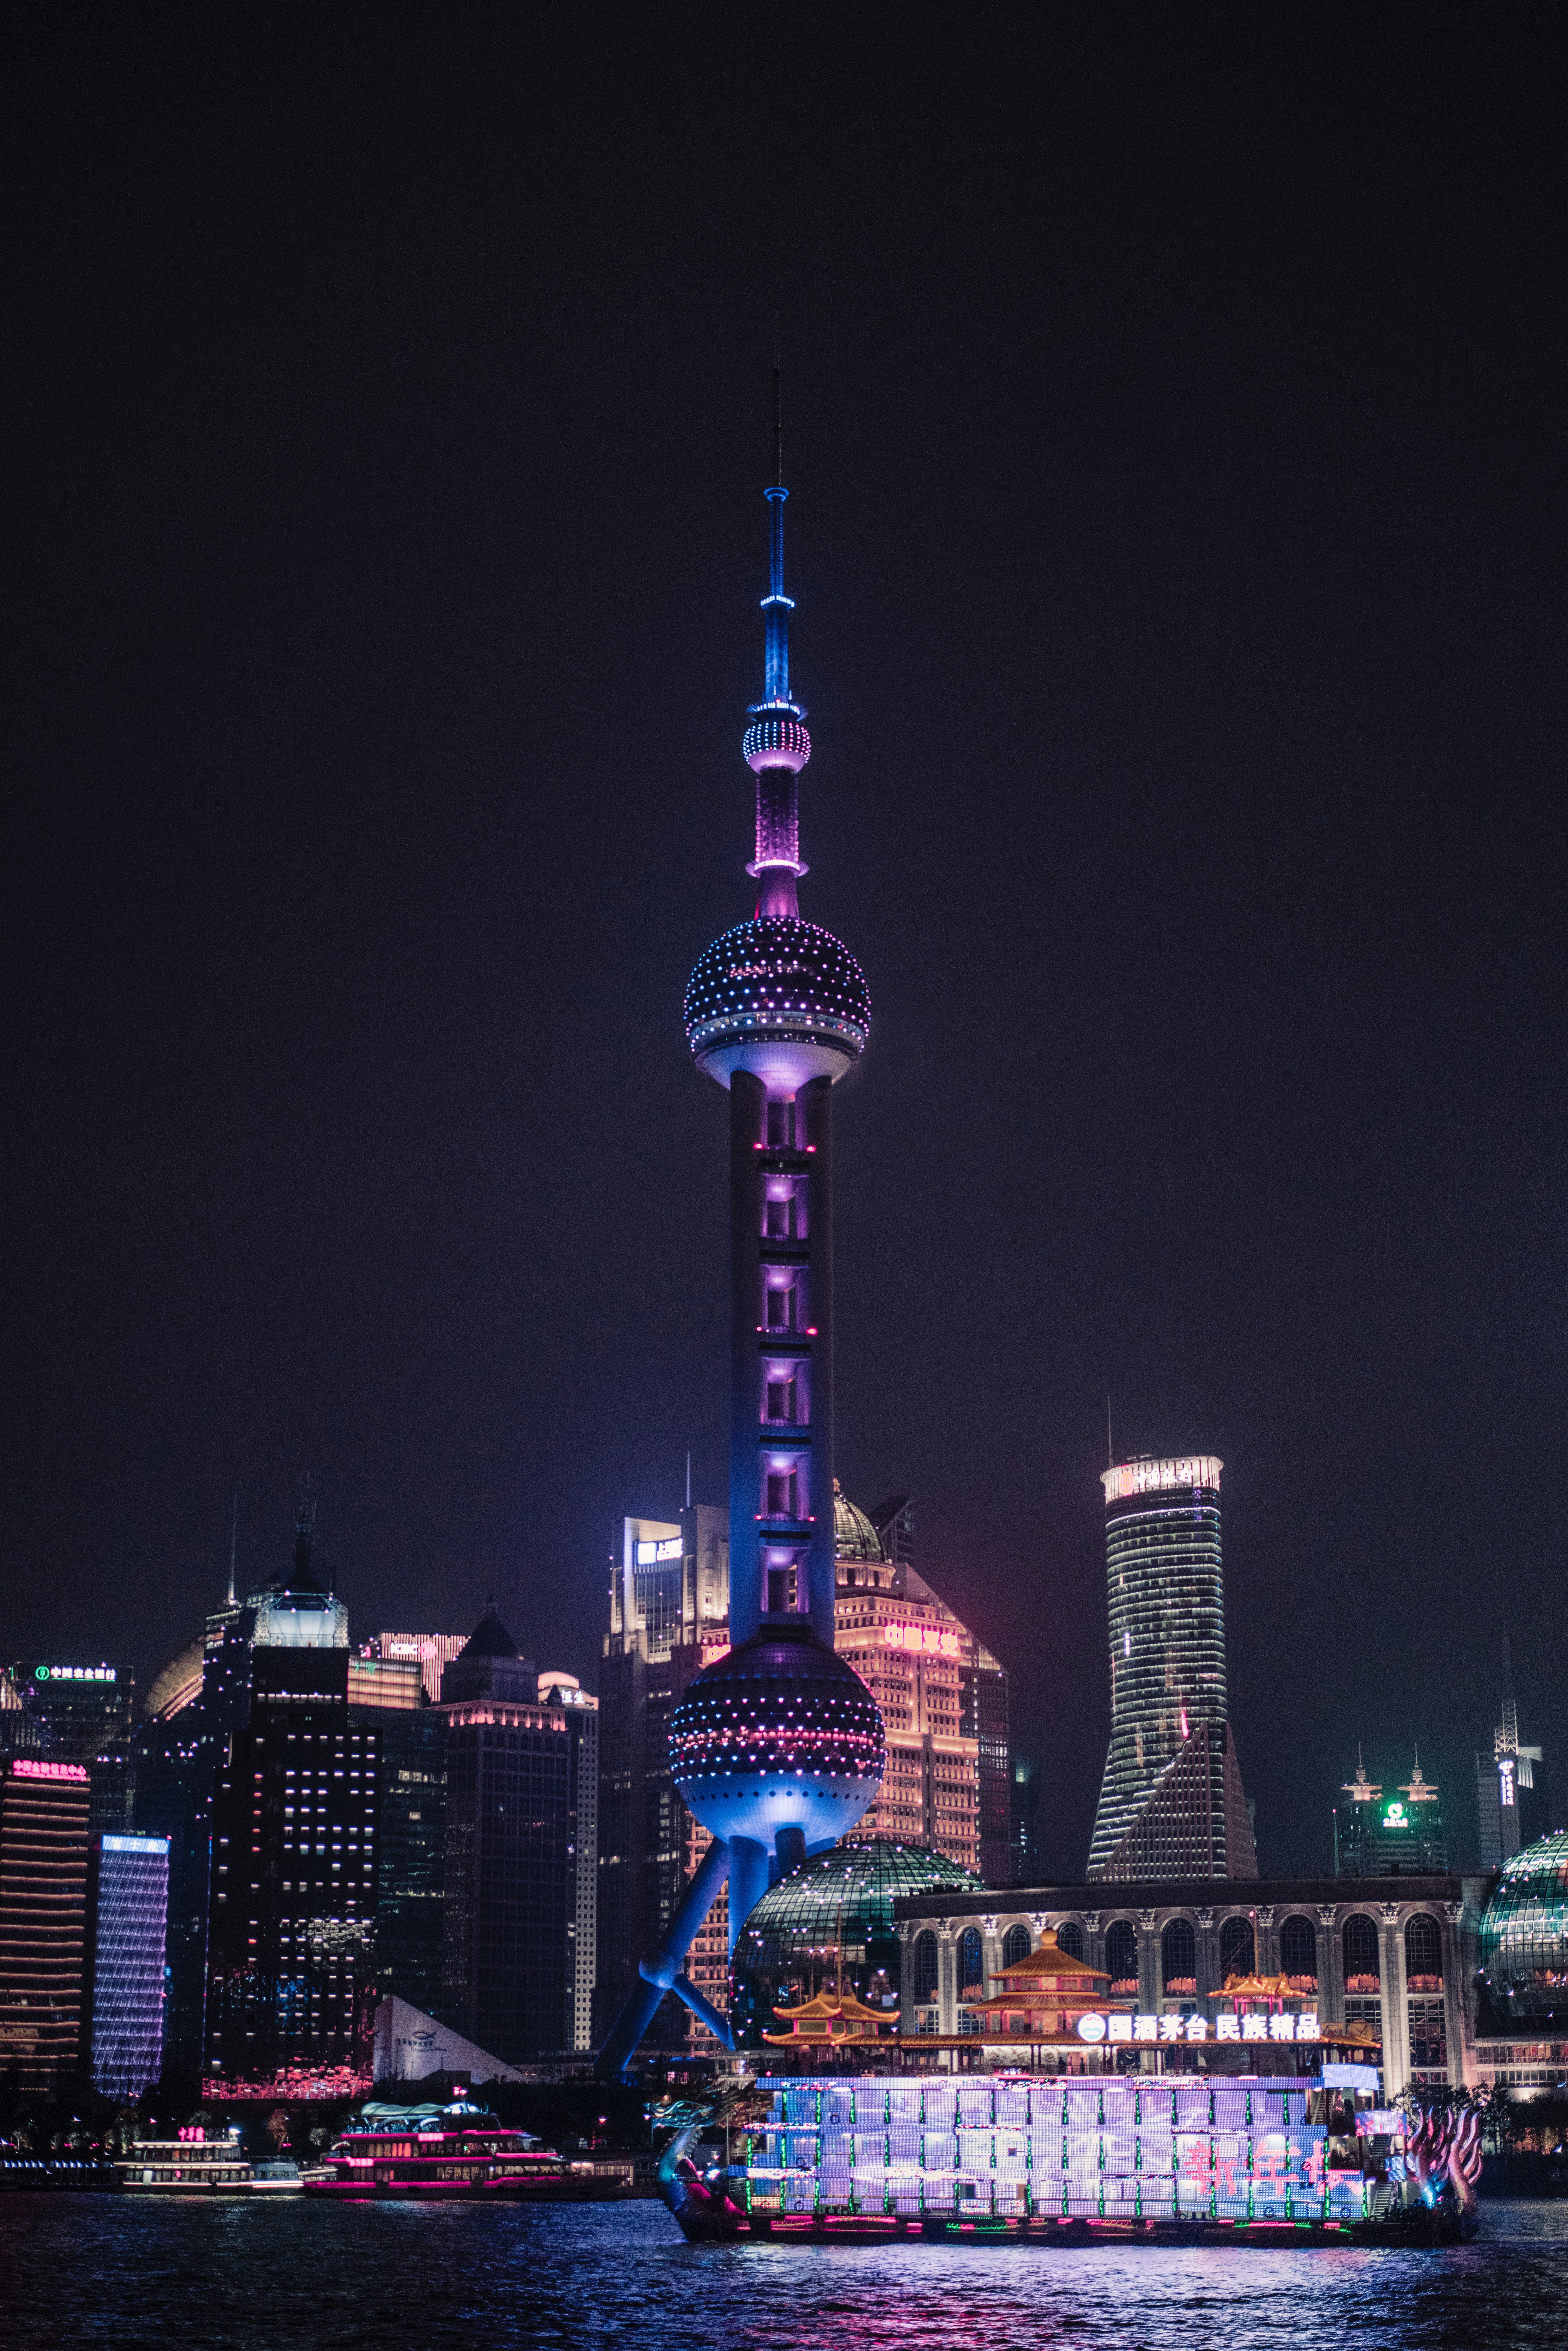 china, cities, architecture, building, night city, tower, shanghai images